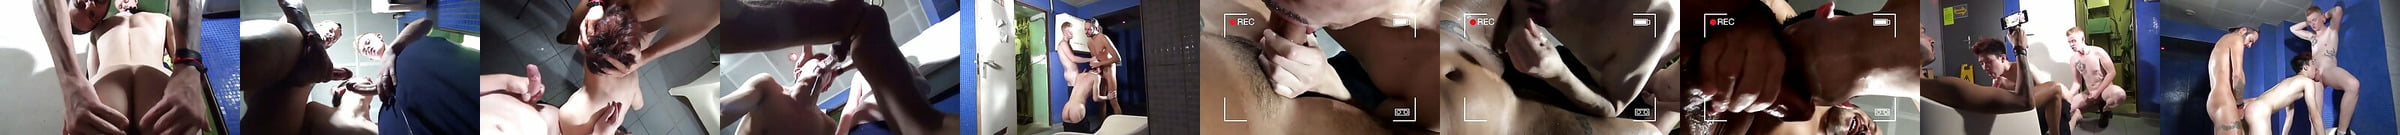 Cute Twink Blows A Guy And Eats Cum In Public Restroom Xhamster 